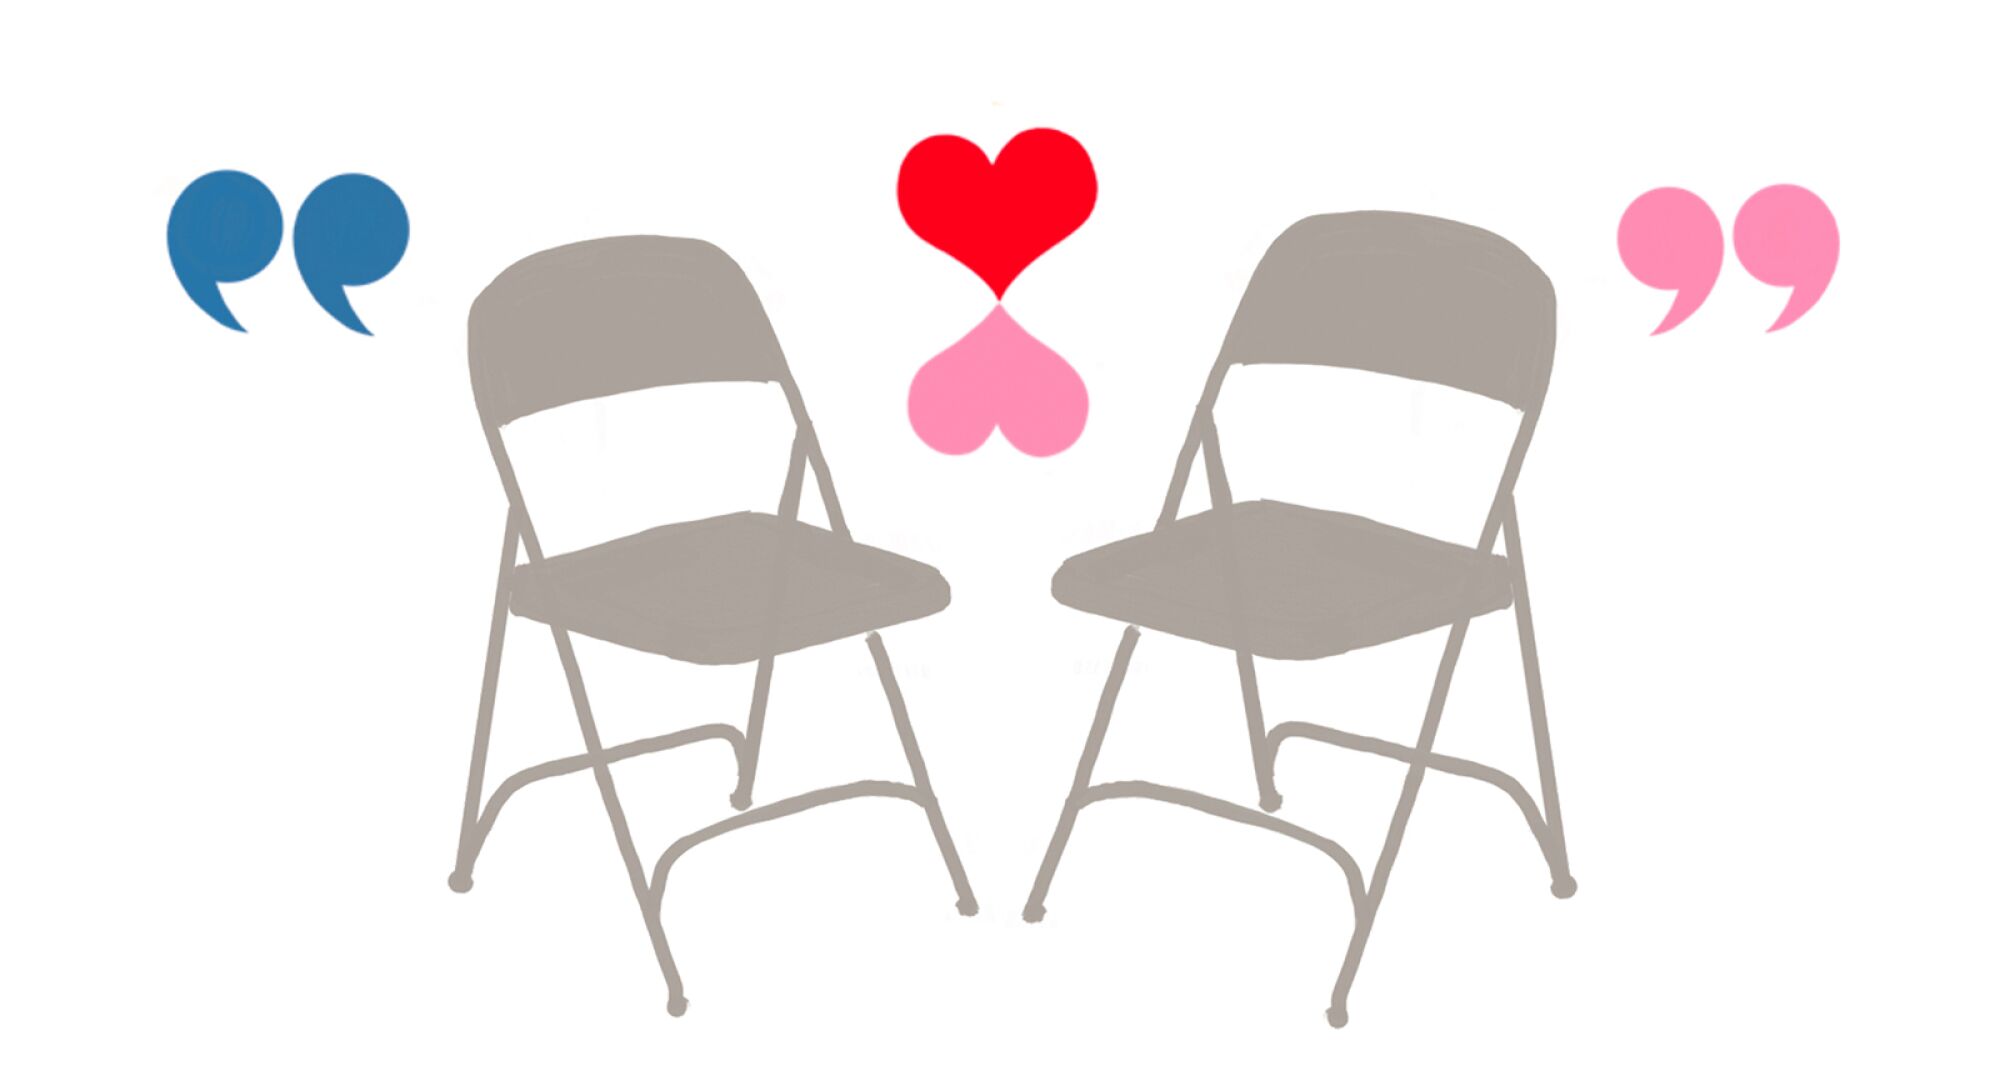 Two folding chairs face each other with two connected hearts floating between them.